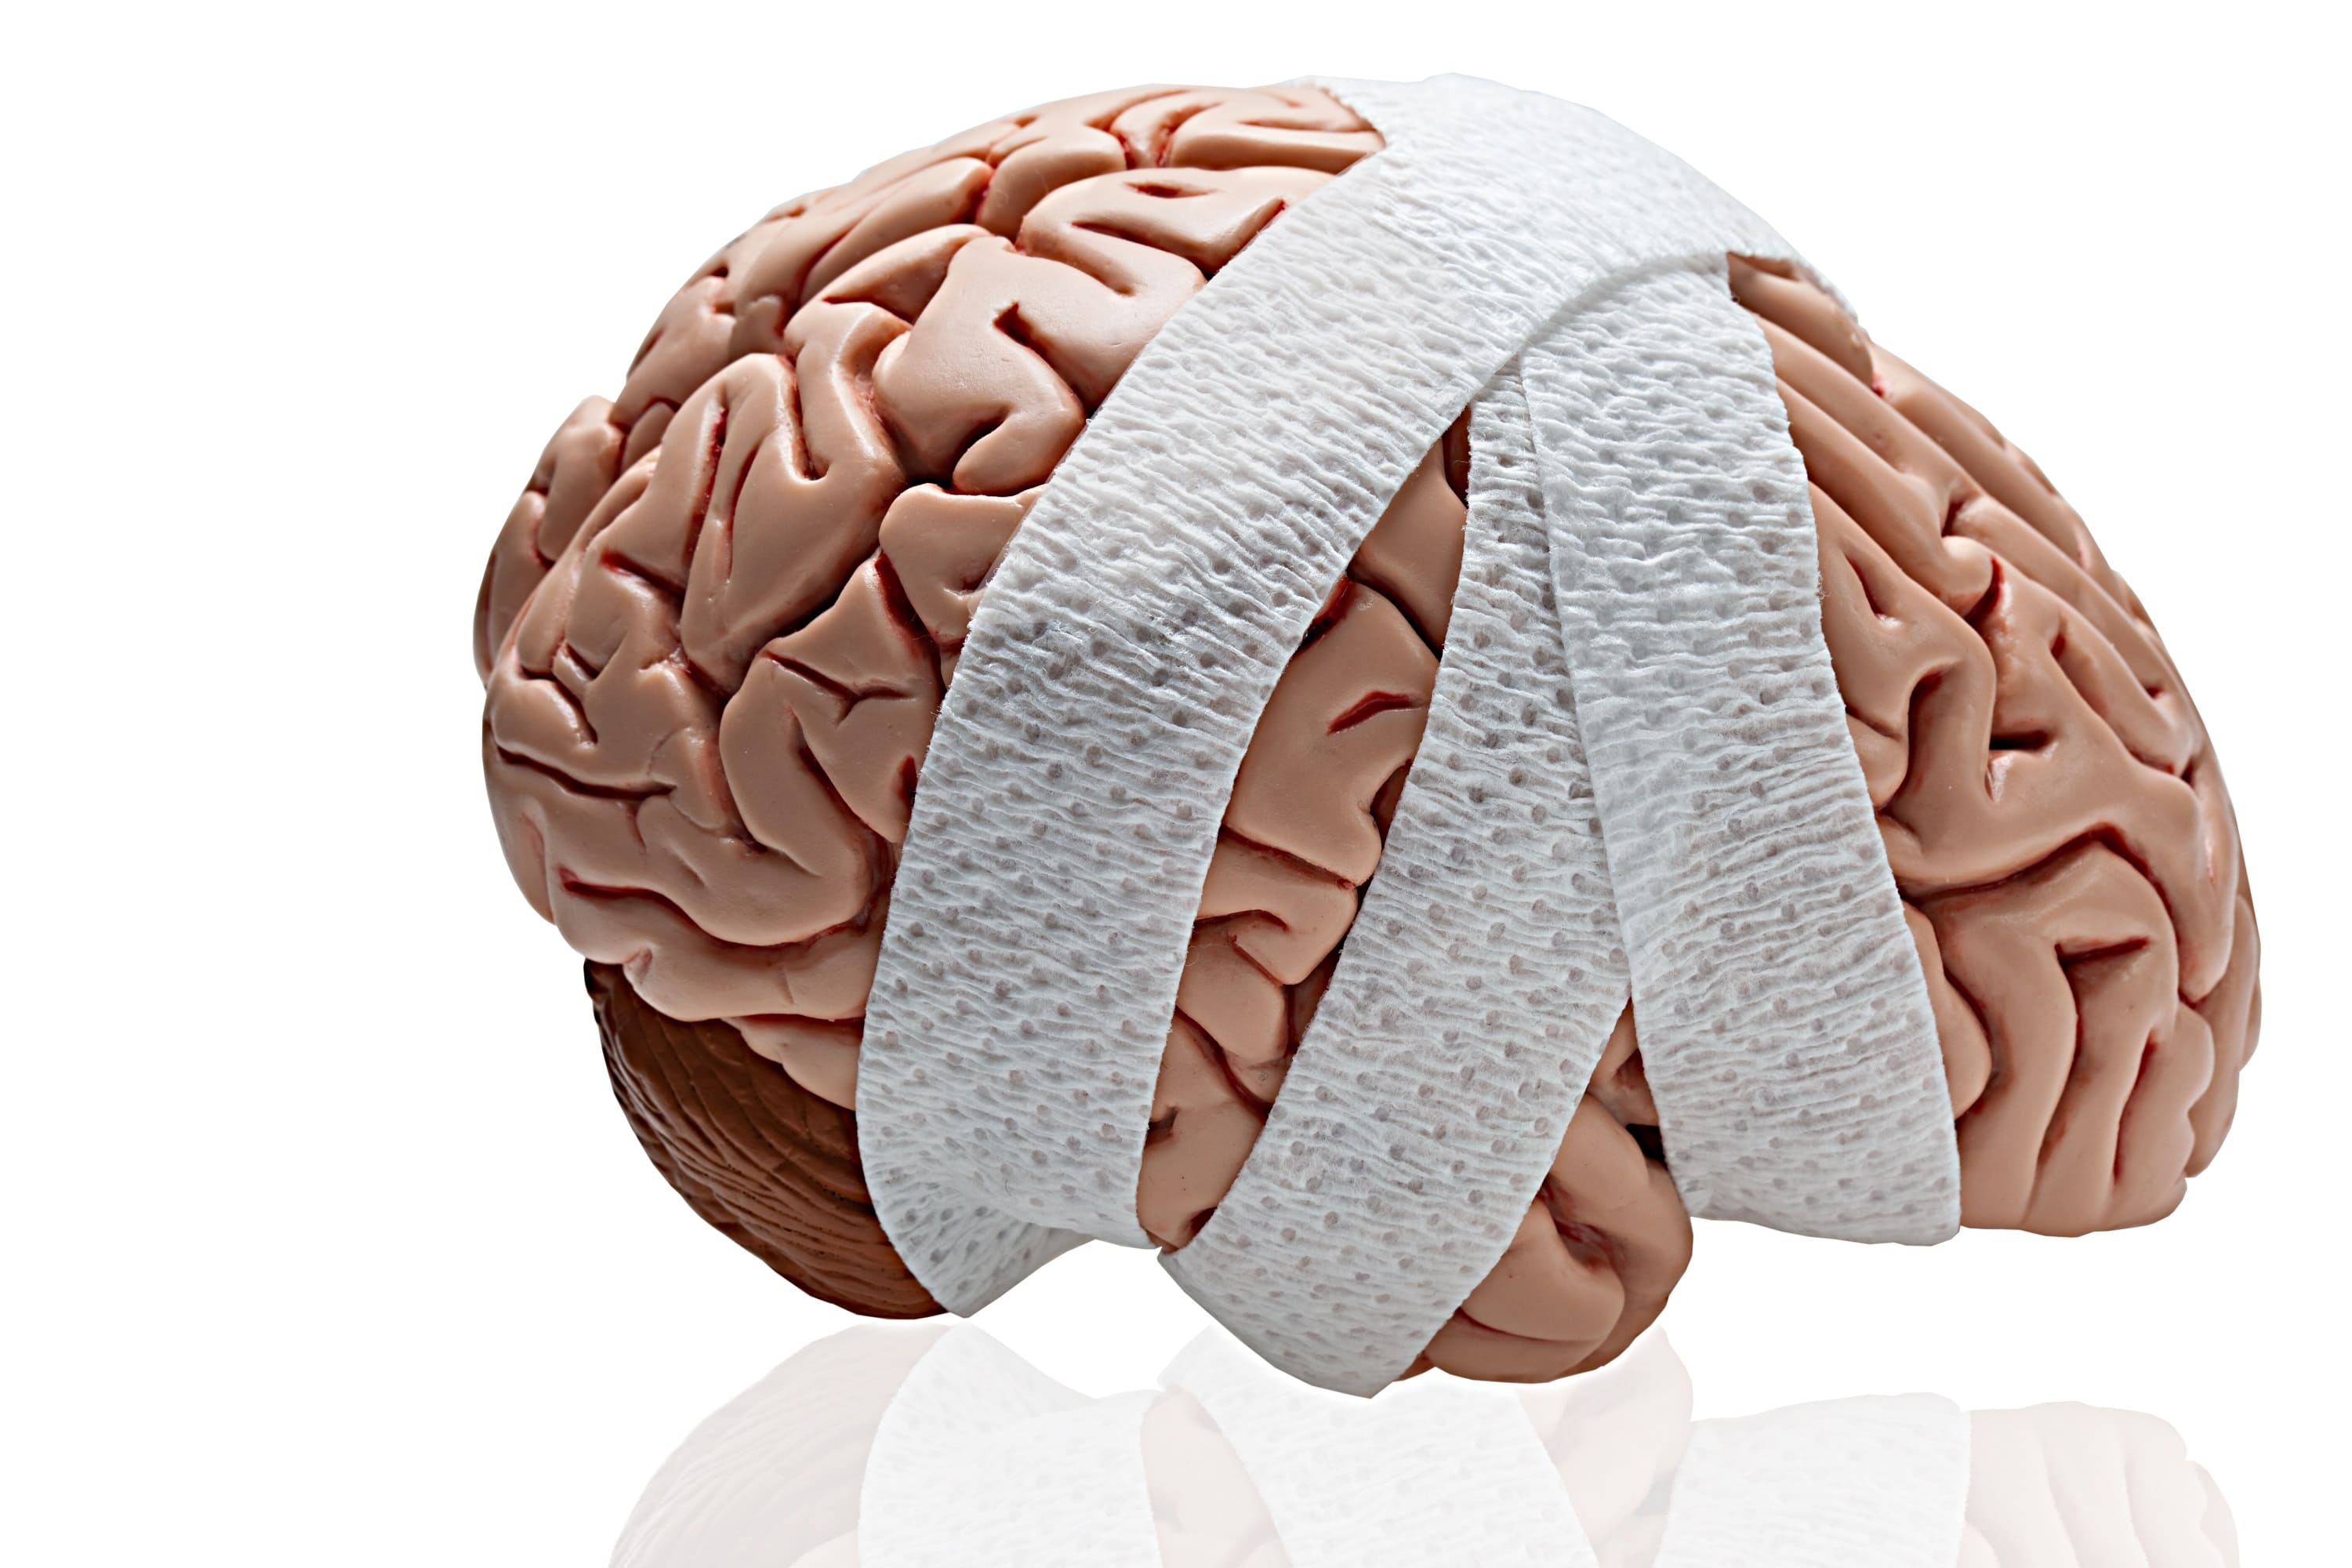 4 Steps to Recovery After a Brain Injury